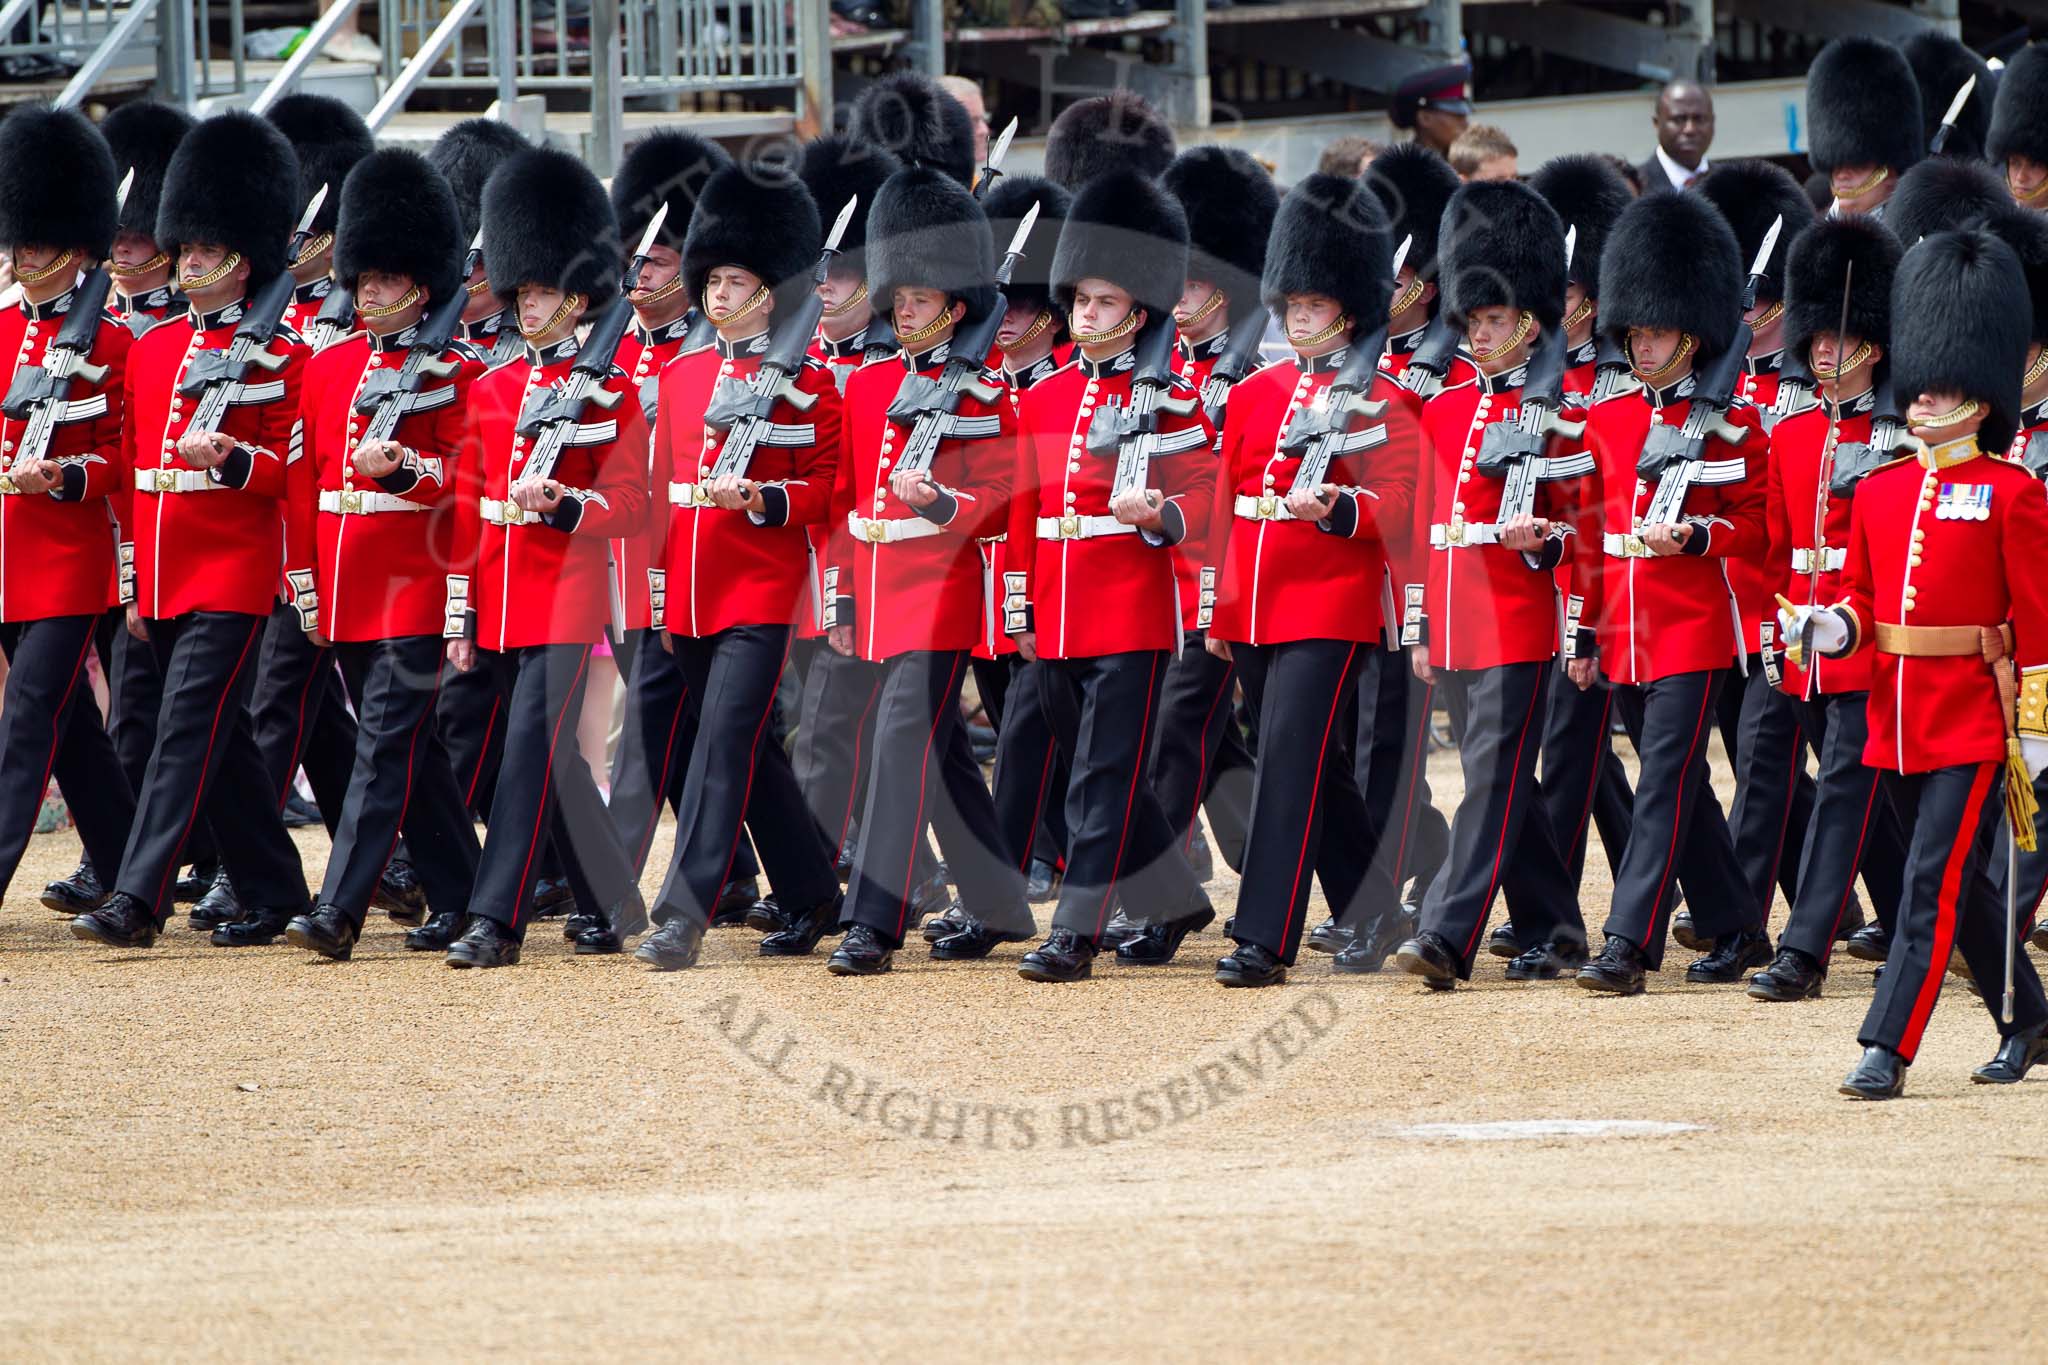 The Colonel's Review 2011: The March Past by the Foot Guards in slow time. Here No. 1 Guard, 1st Battalion Scots Guards, commanded by Major Roderick Shannon (on the right)..
Horse Guards Parade, Westminster,
London SW1,

United Kingdom,
on 04 June 2011 at 11:32, image #159